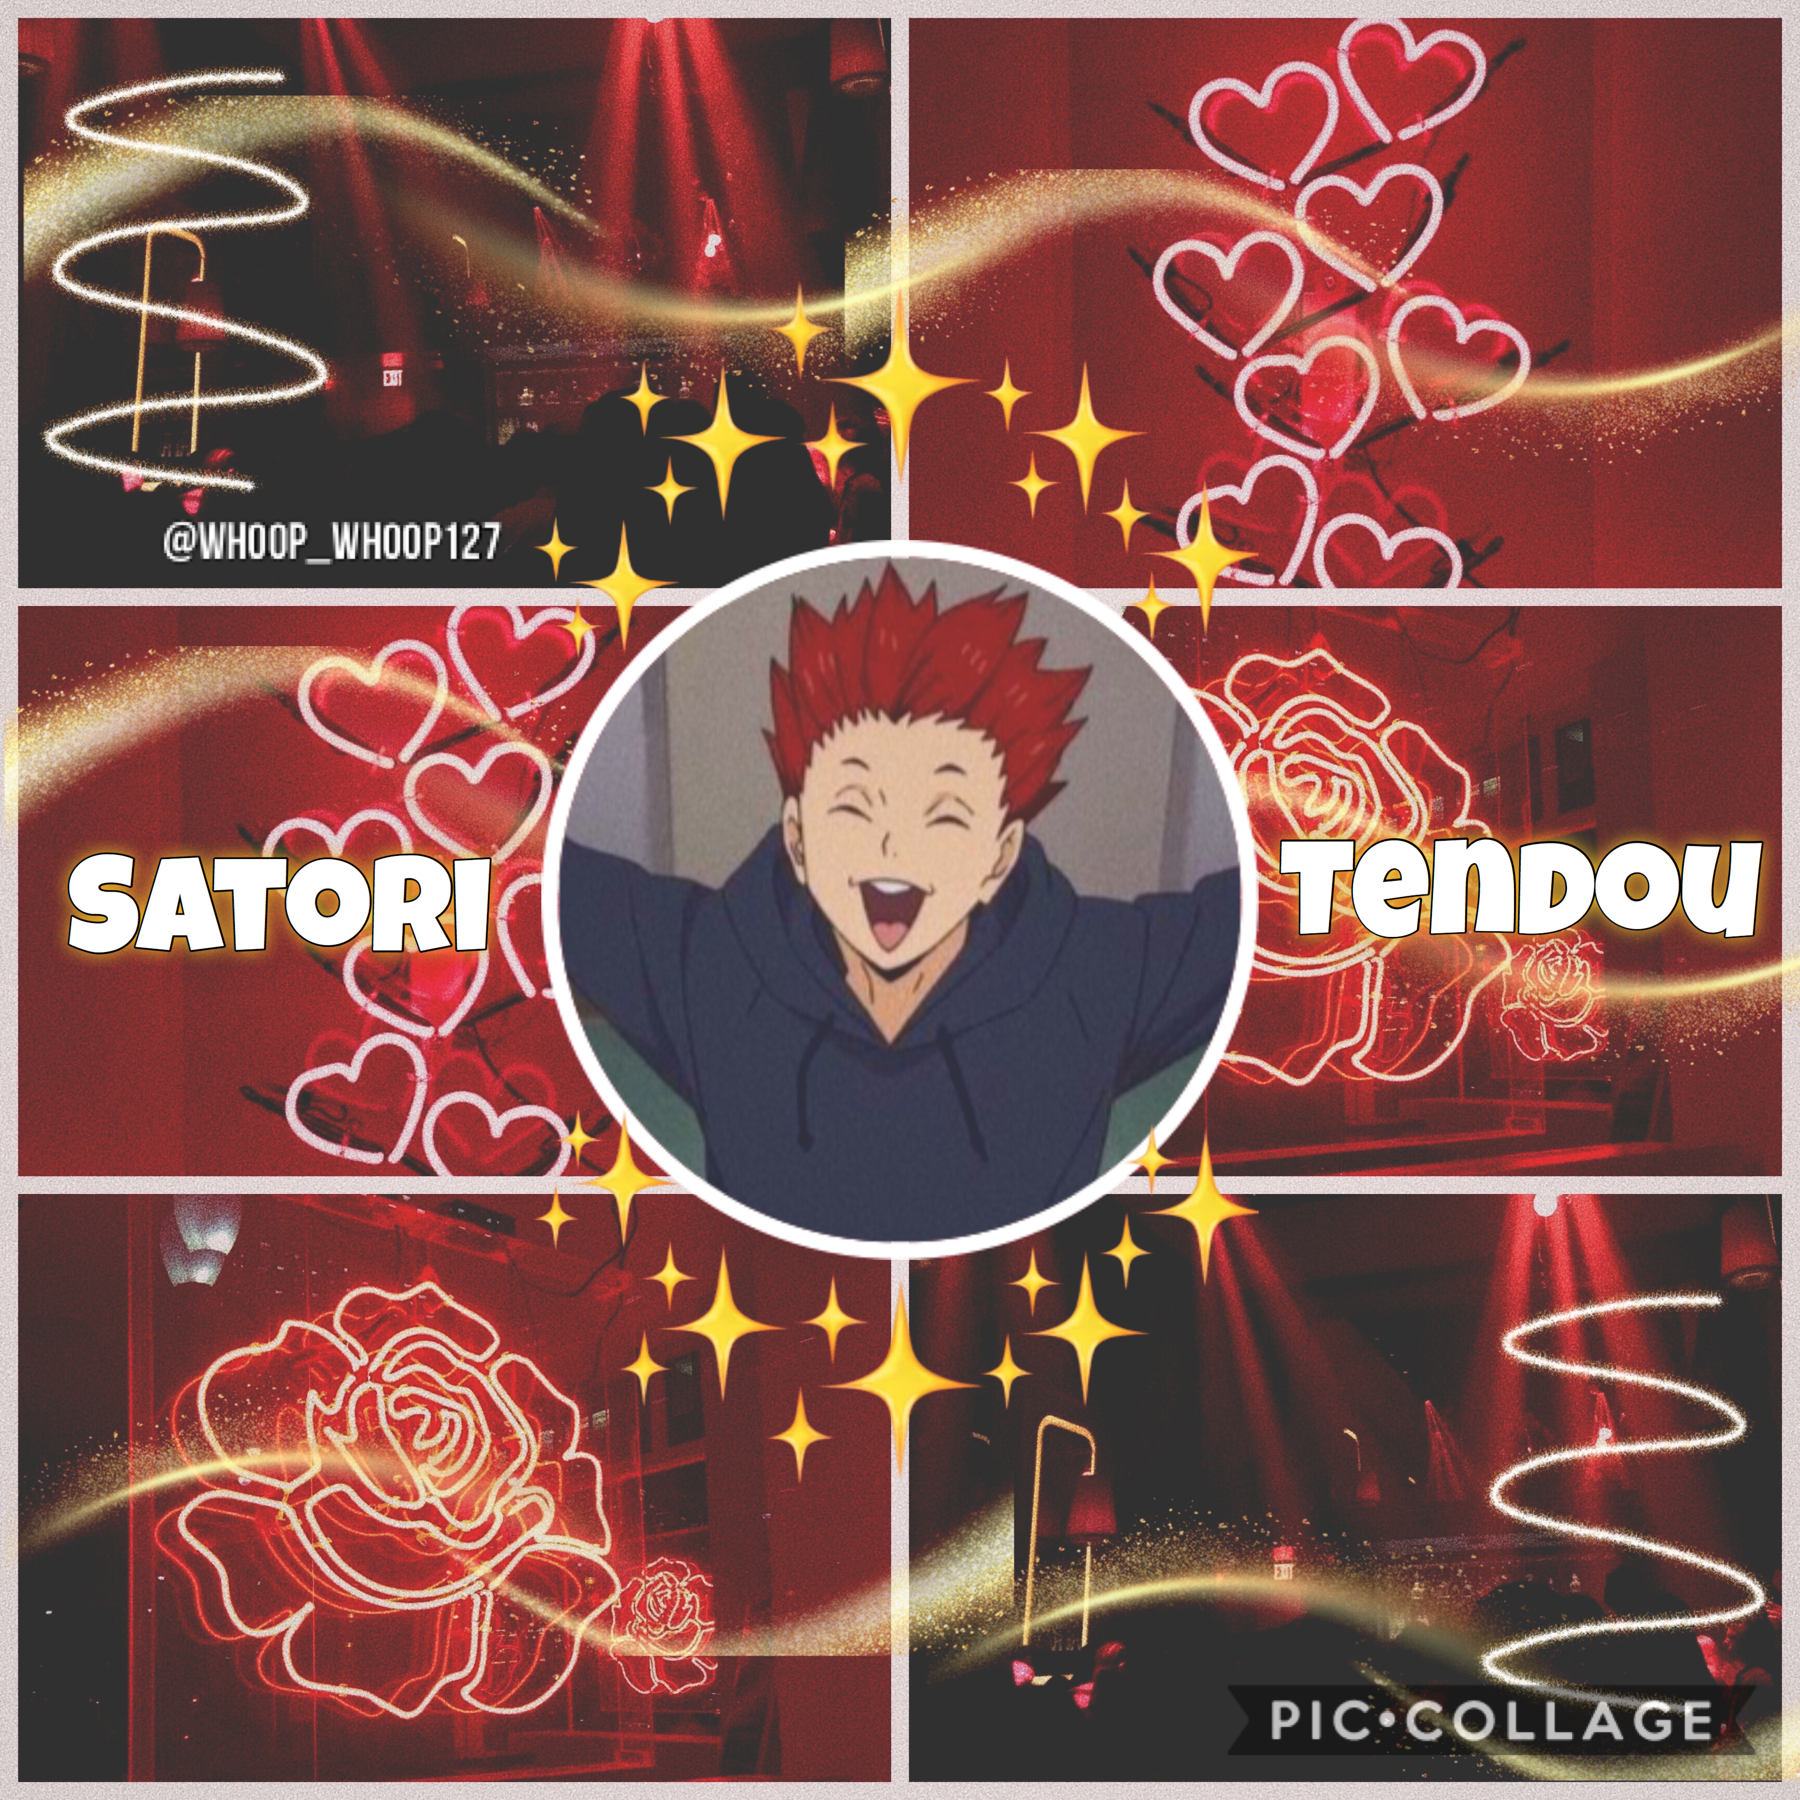 •🚒•
🌹Tendou~ Haikyuu🌹
This is kinda messy in a way and loud(?) Idk but ig it matches Tendou’s crazy personality 😂🥺🥺🥺❤️ Btw happy (somewhat) early birthday to my Eomma!!! @Rose_Panda🥺🥺 Send her some love!!!❤️❤️❤️